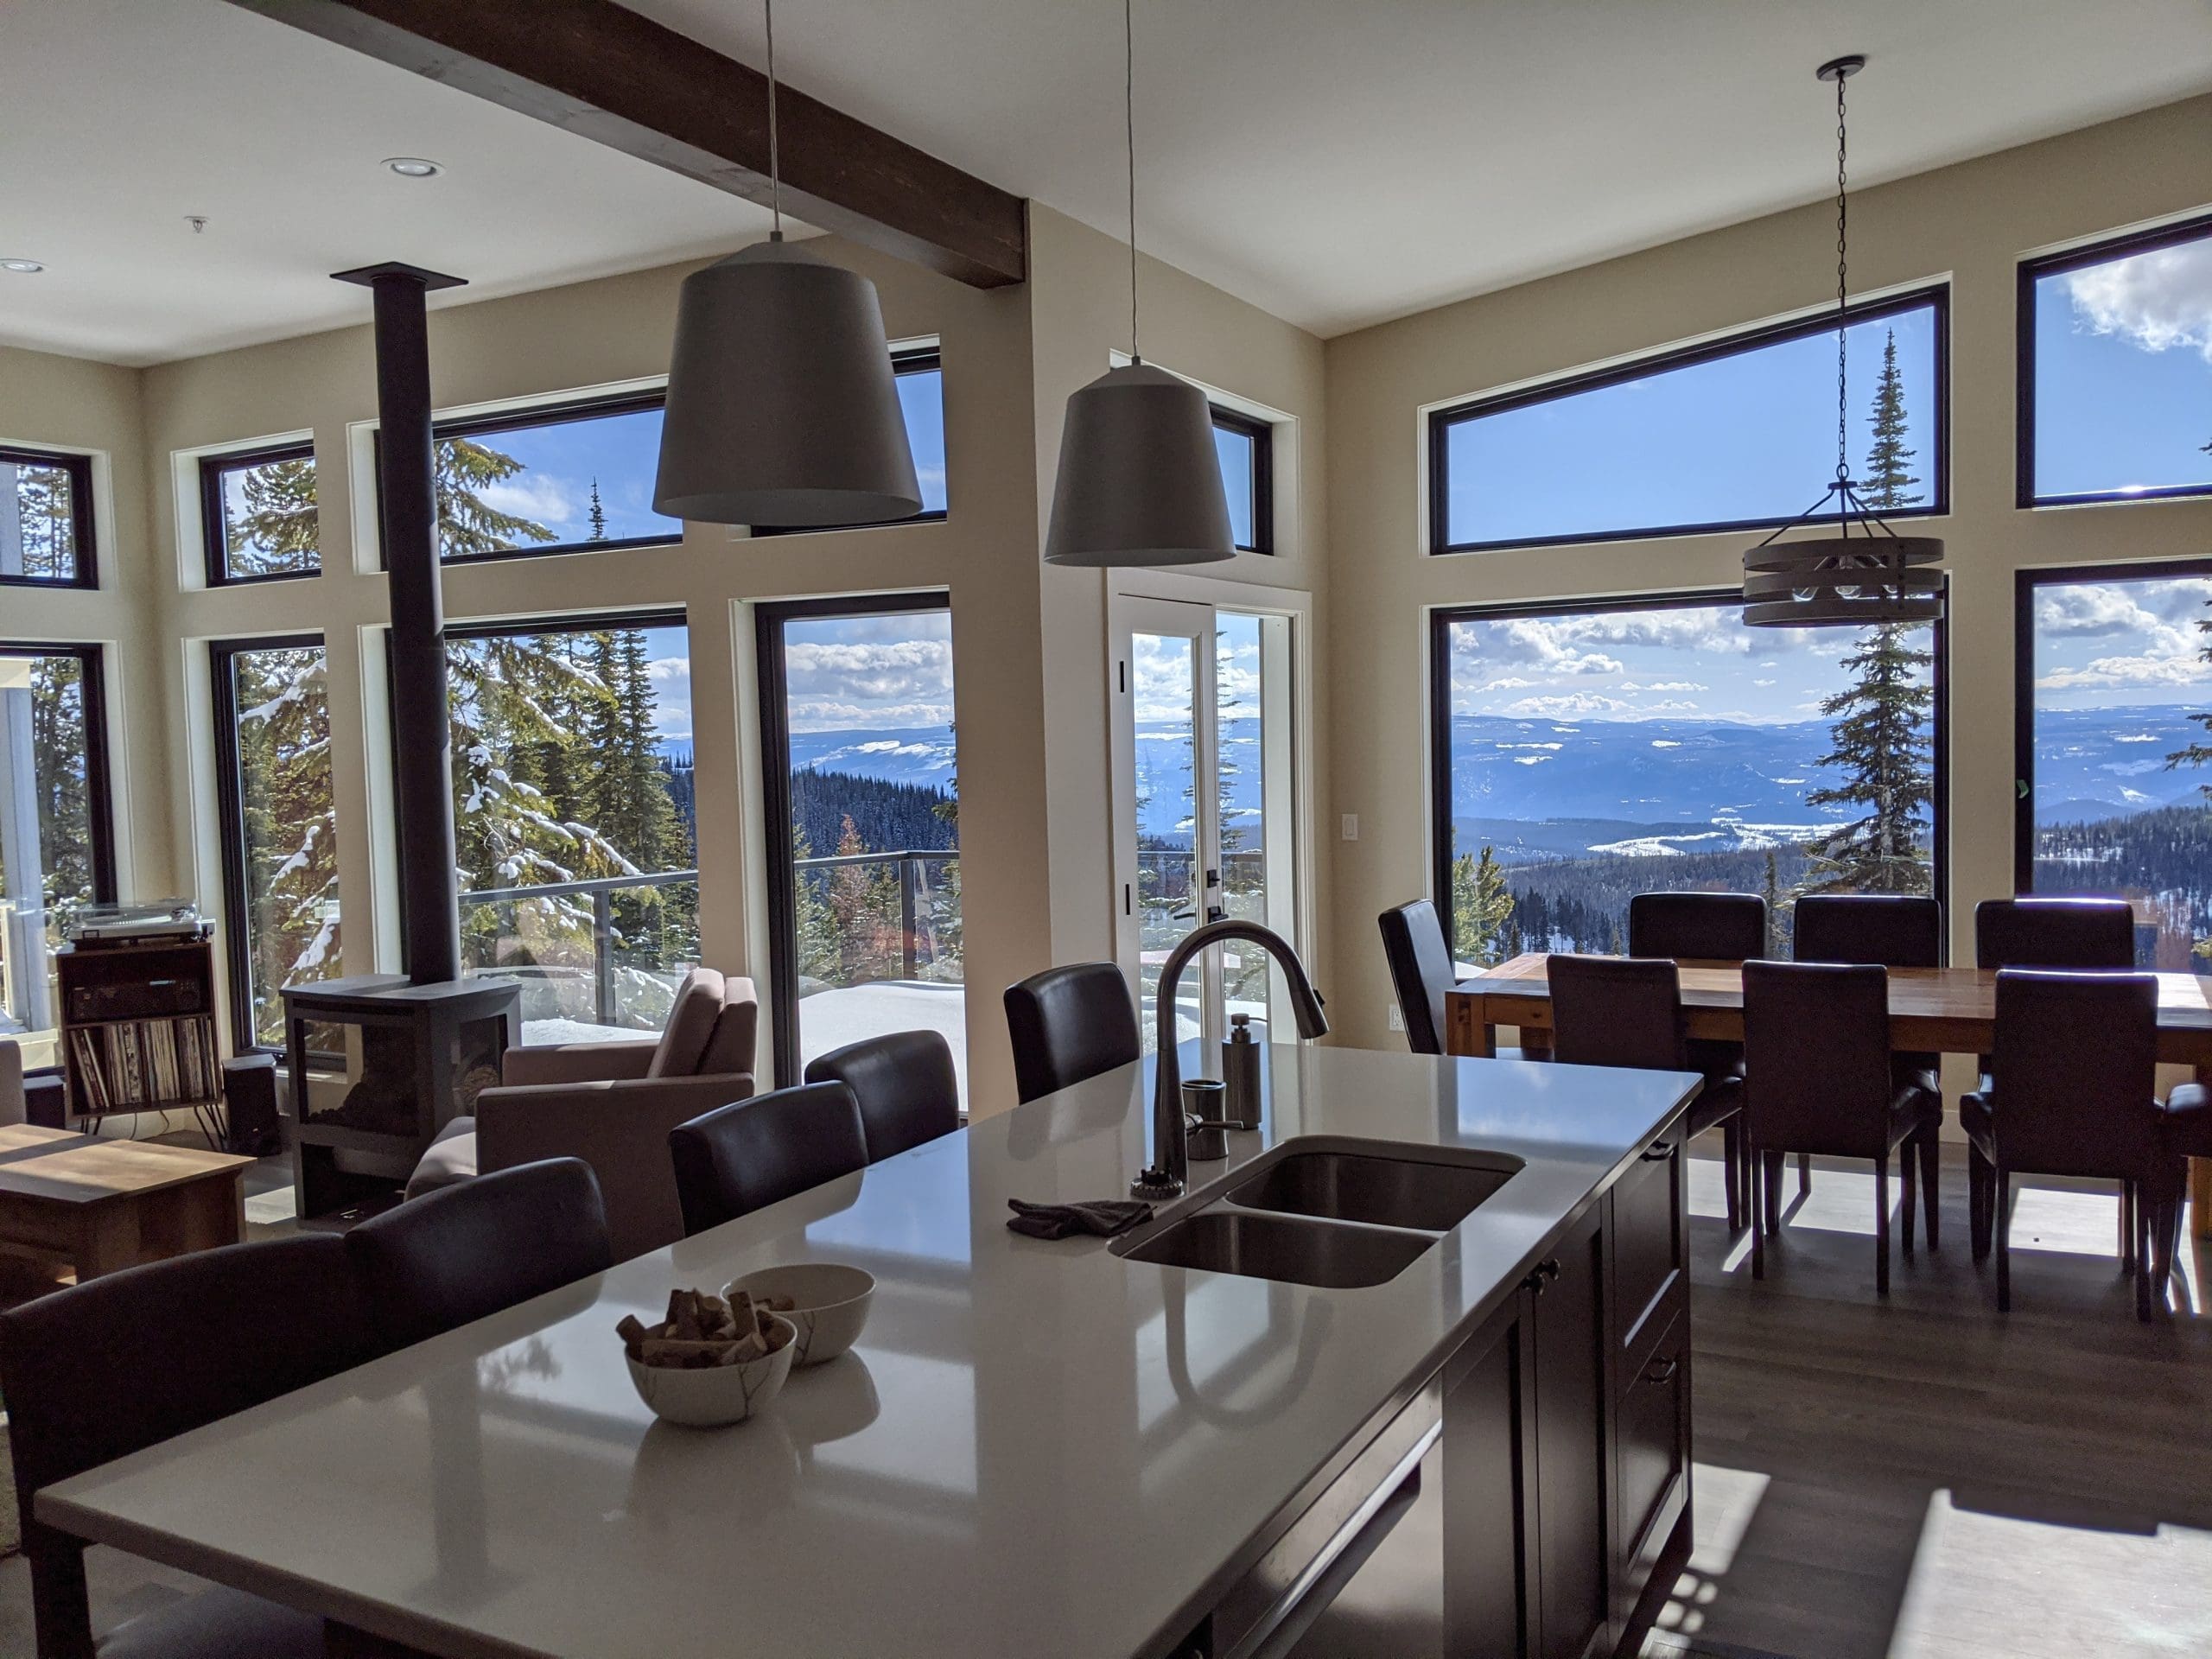 Living Room/Kitchen and Dining table with large bright windows with mountain views, fully equipped kitchen, private hot tub, laundry, lower level den/TV room.